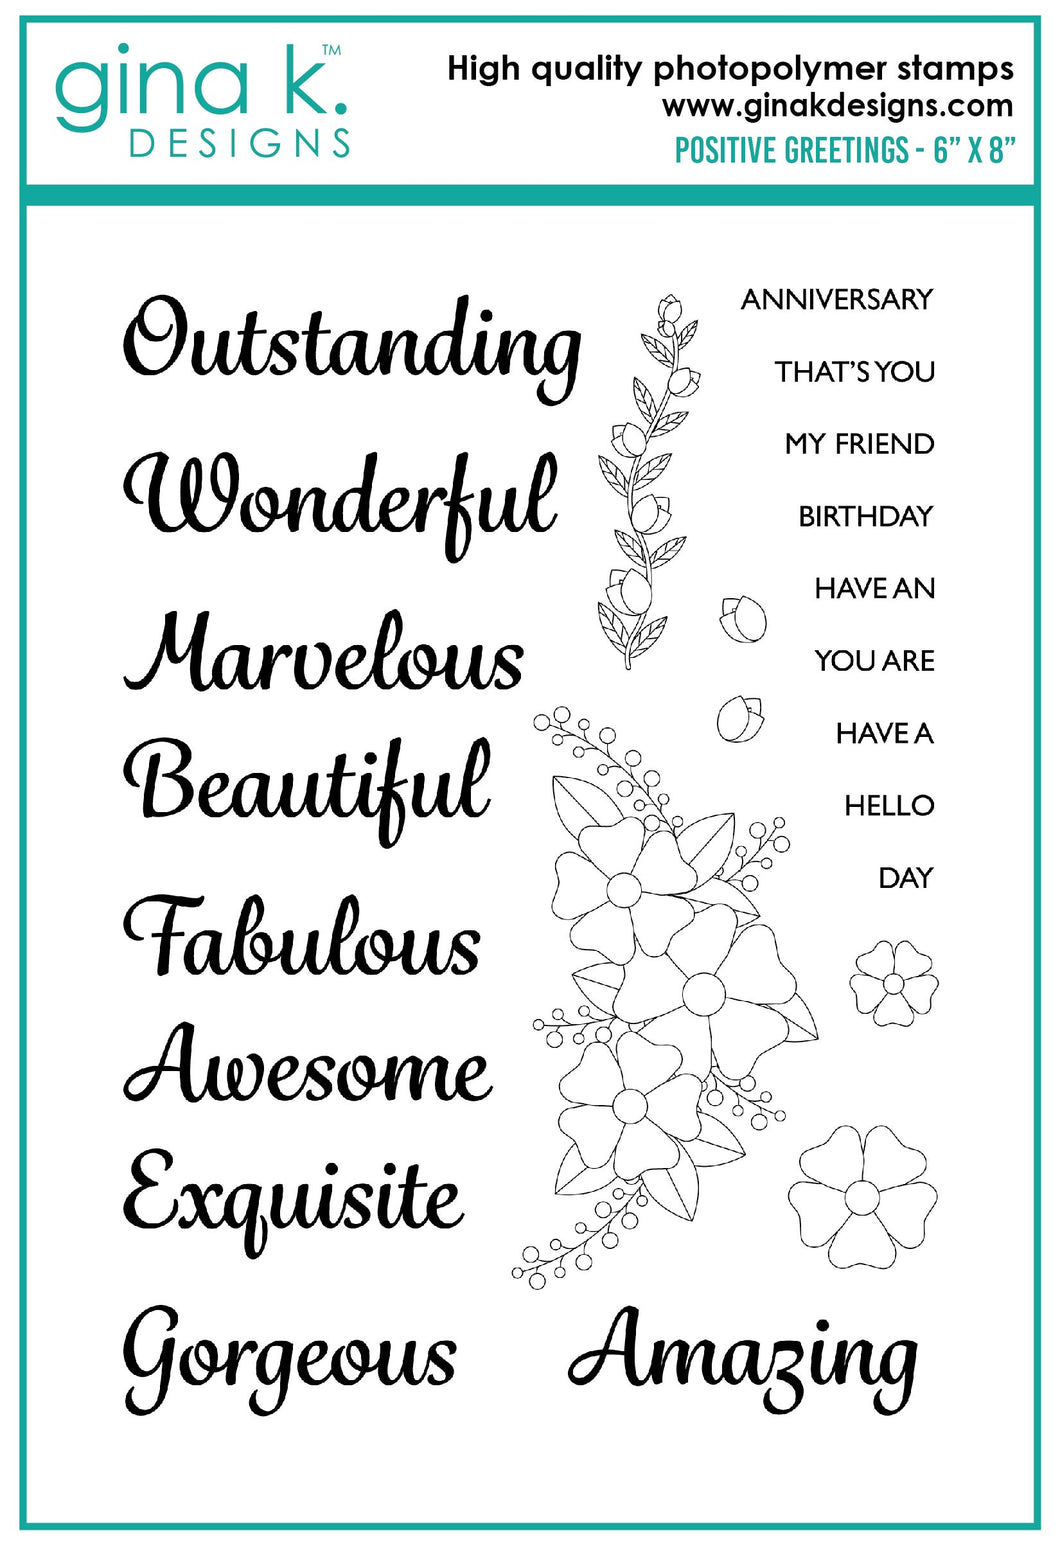 Gina K. Designs - Stamp & Die Set - Positive Greetings. Positive Greetings is a stamp set by Debrah Warner. Use the die cuts to easily cut out your script to create layers and dimensions. Made in the USA. Made in the USA. Available at Embellish Away located in Bowmanville Ontario Canada.